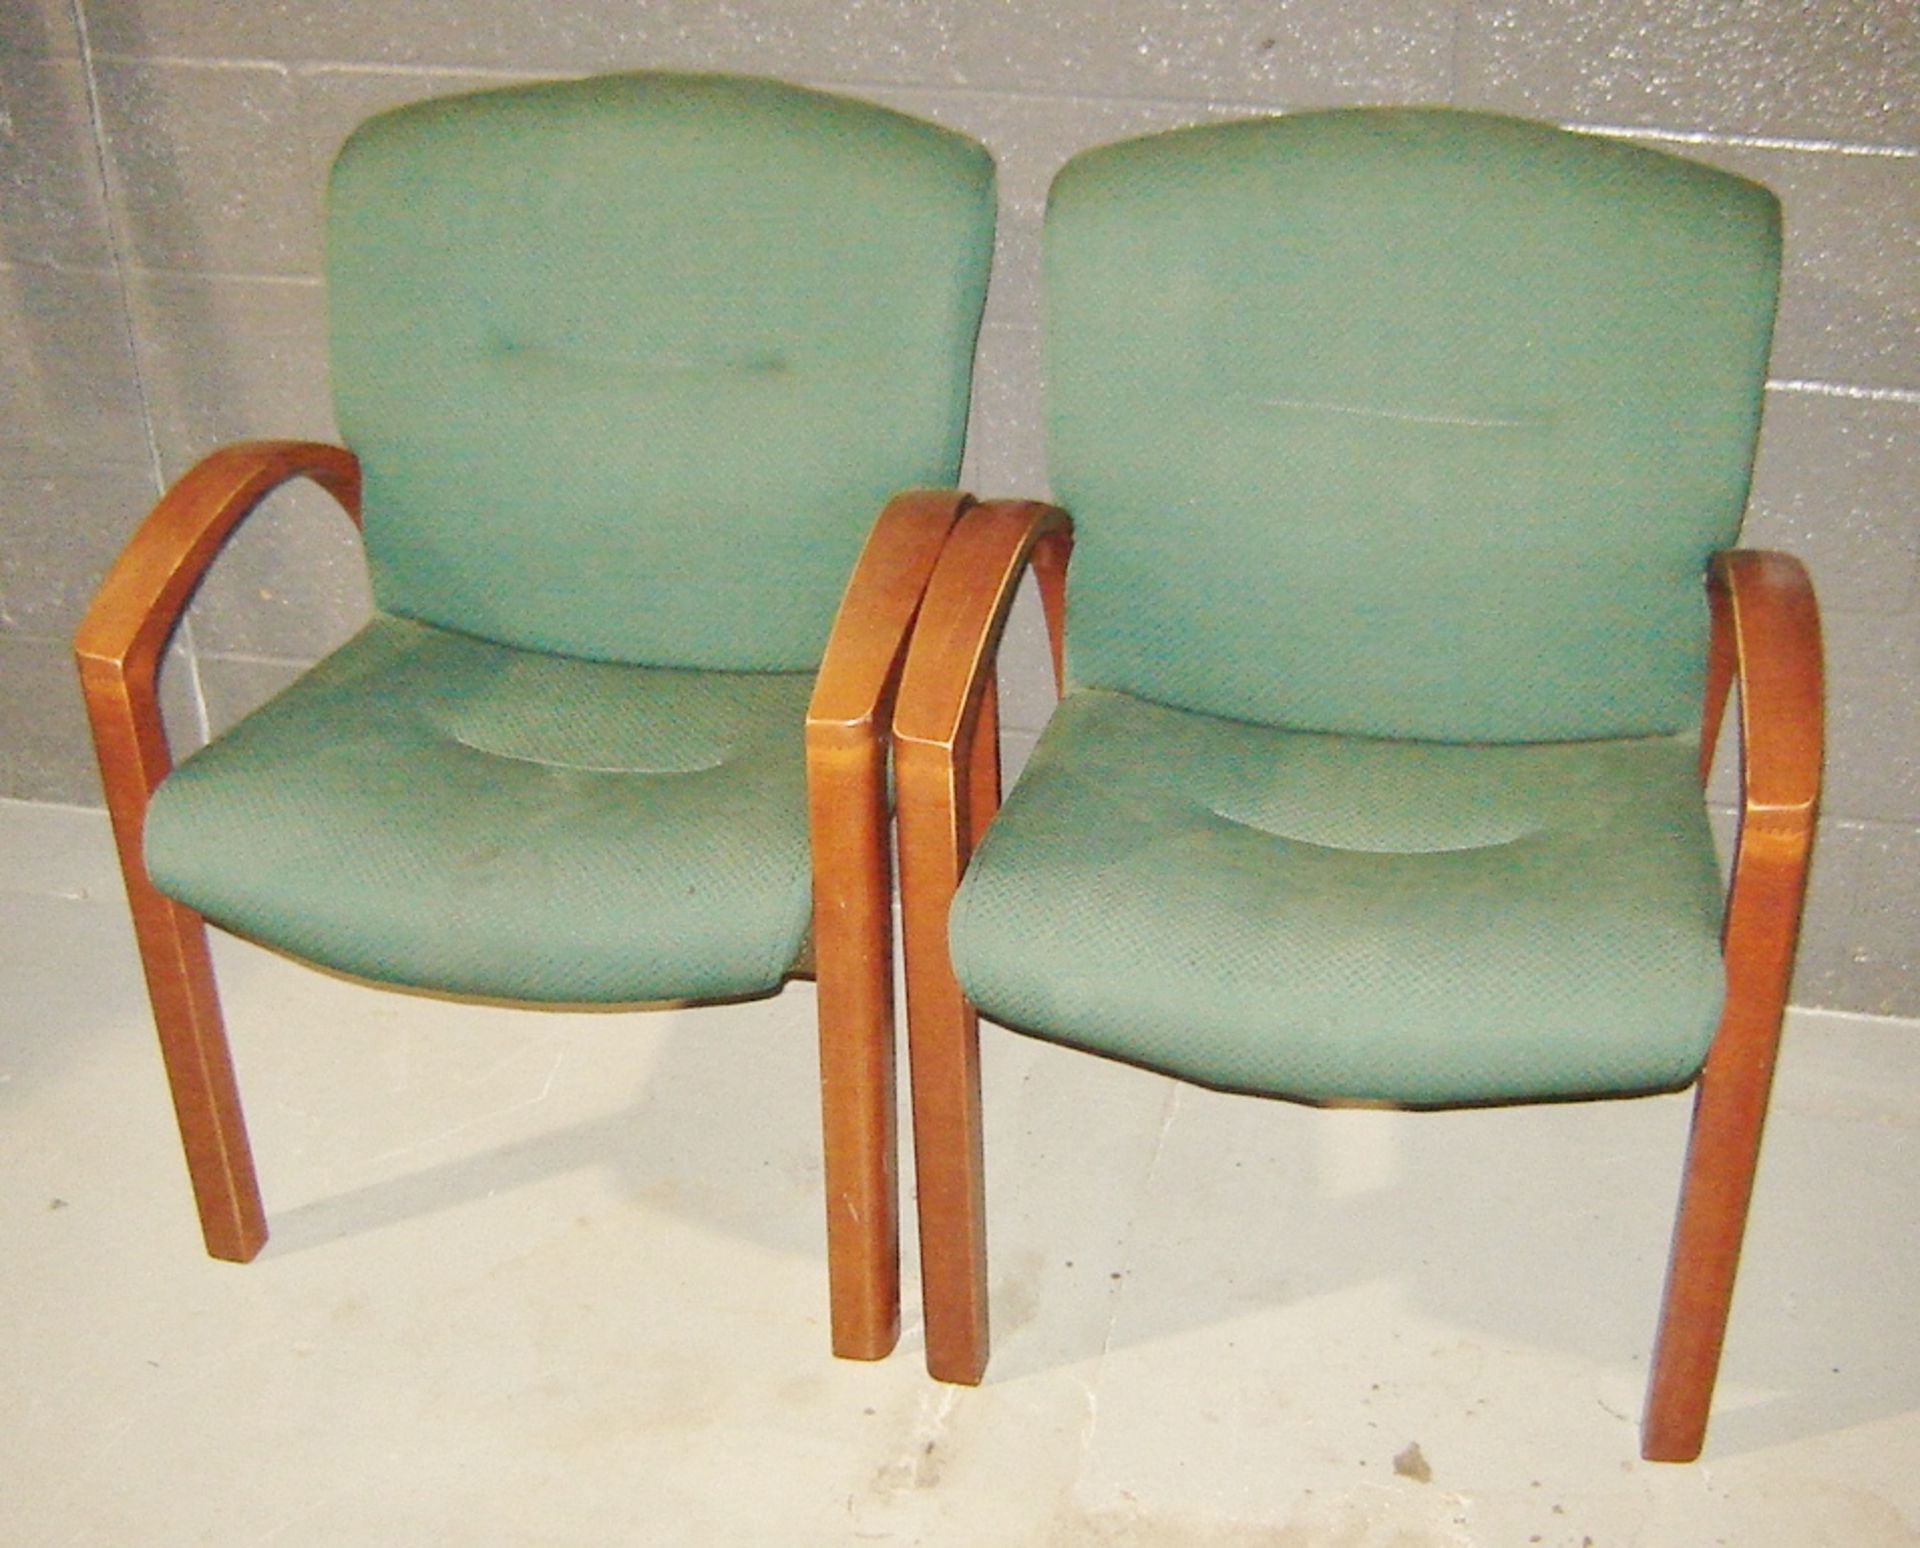 Upholstered & Wooden Frame Arm Chairs - Image 3 of 4